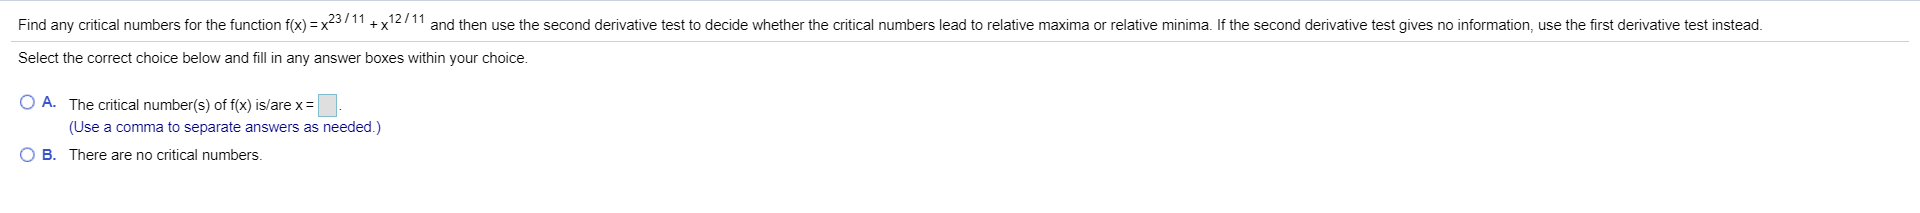 Find any critical numbers for the function f(x) x2311+x111and then use the second derivative test to decide whether the critical numbers lead to relative maxima or relative minima. If the second derivative test gives no information, use the first derivative test instead
Select the correct choice below and fill in any answer boxes within your choice.
O A. The critical number(s) of f(x) is/are x
(Use a comma to separate answers as needed.)
O B. There are no critical numbers.
